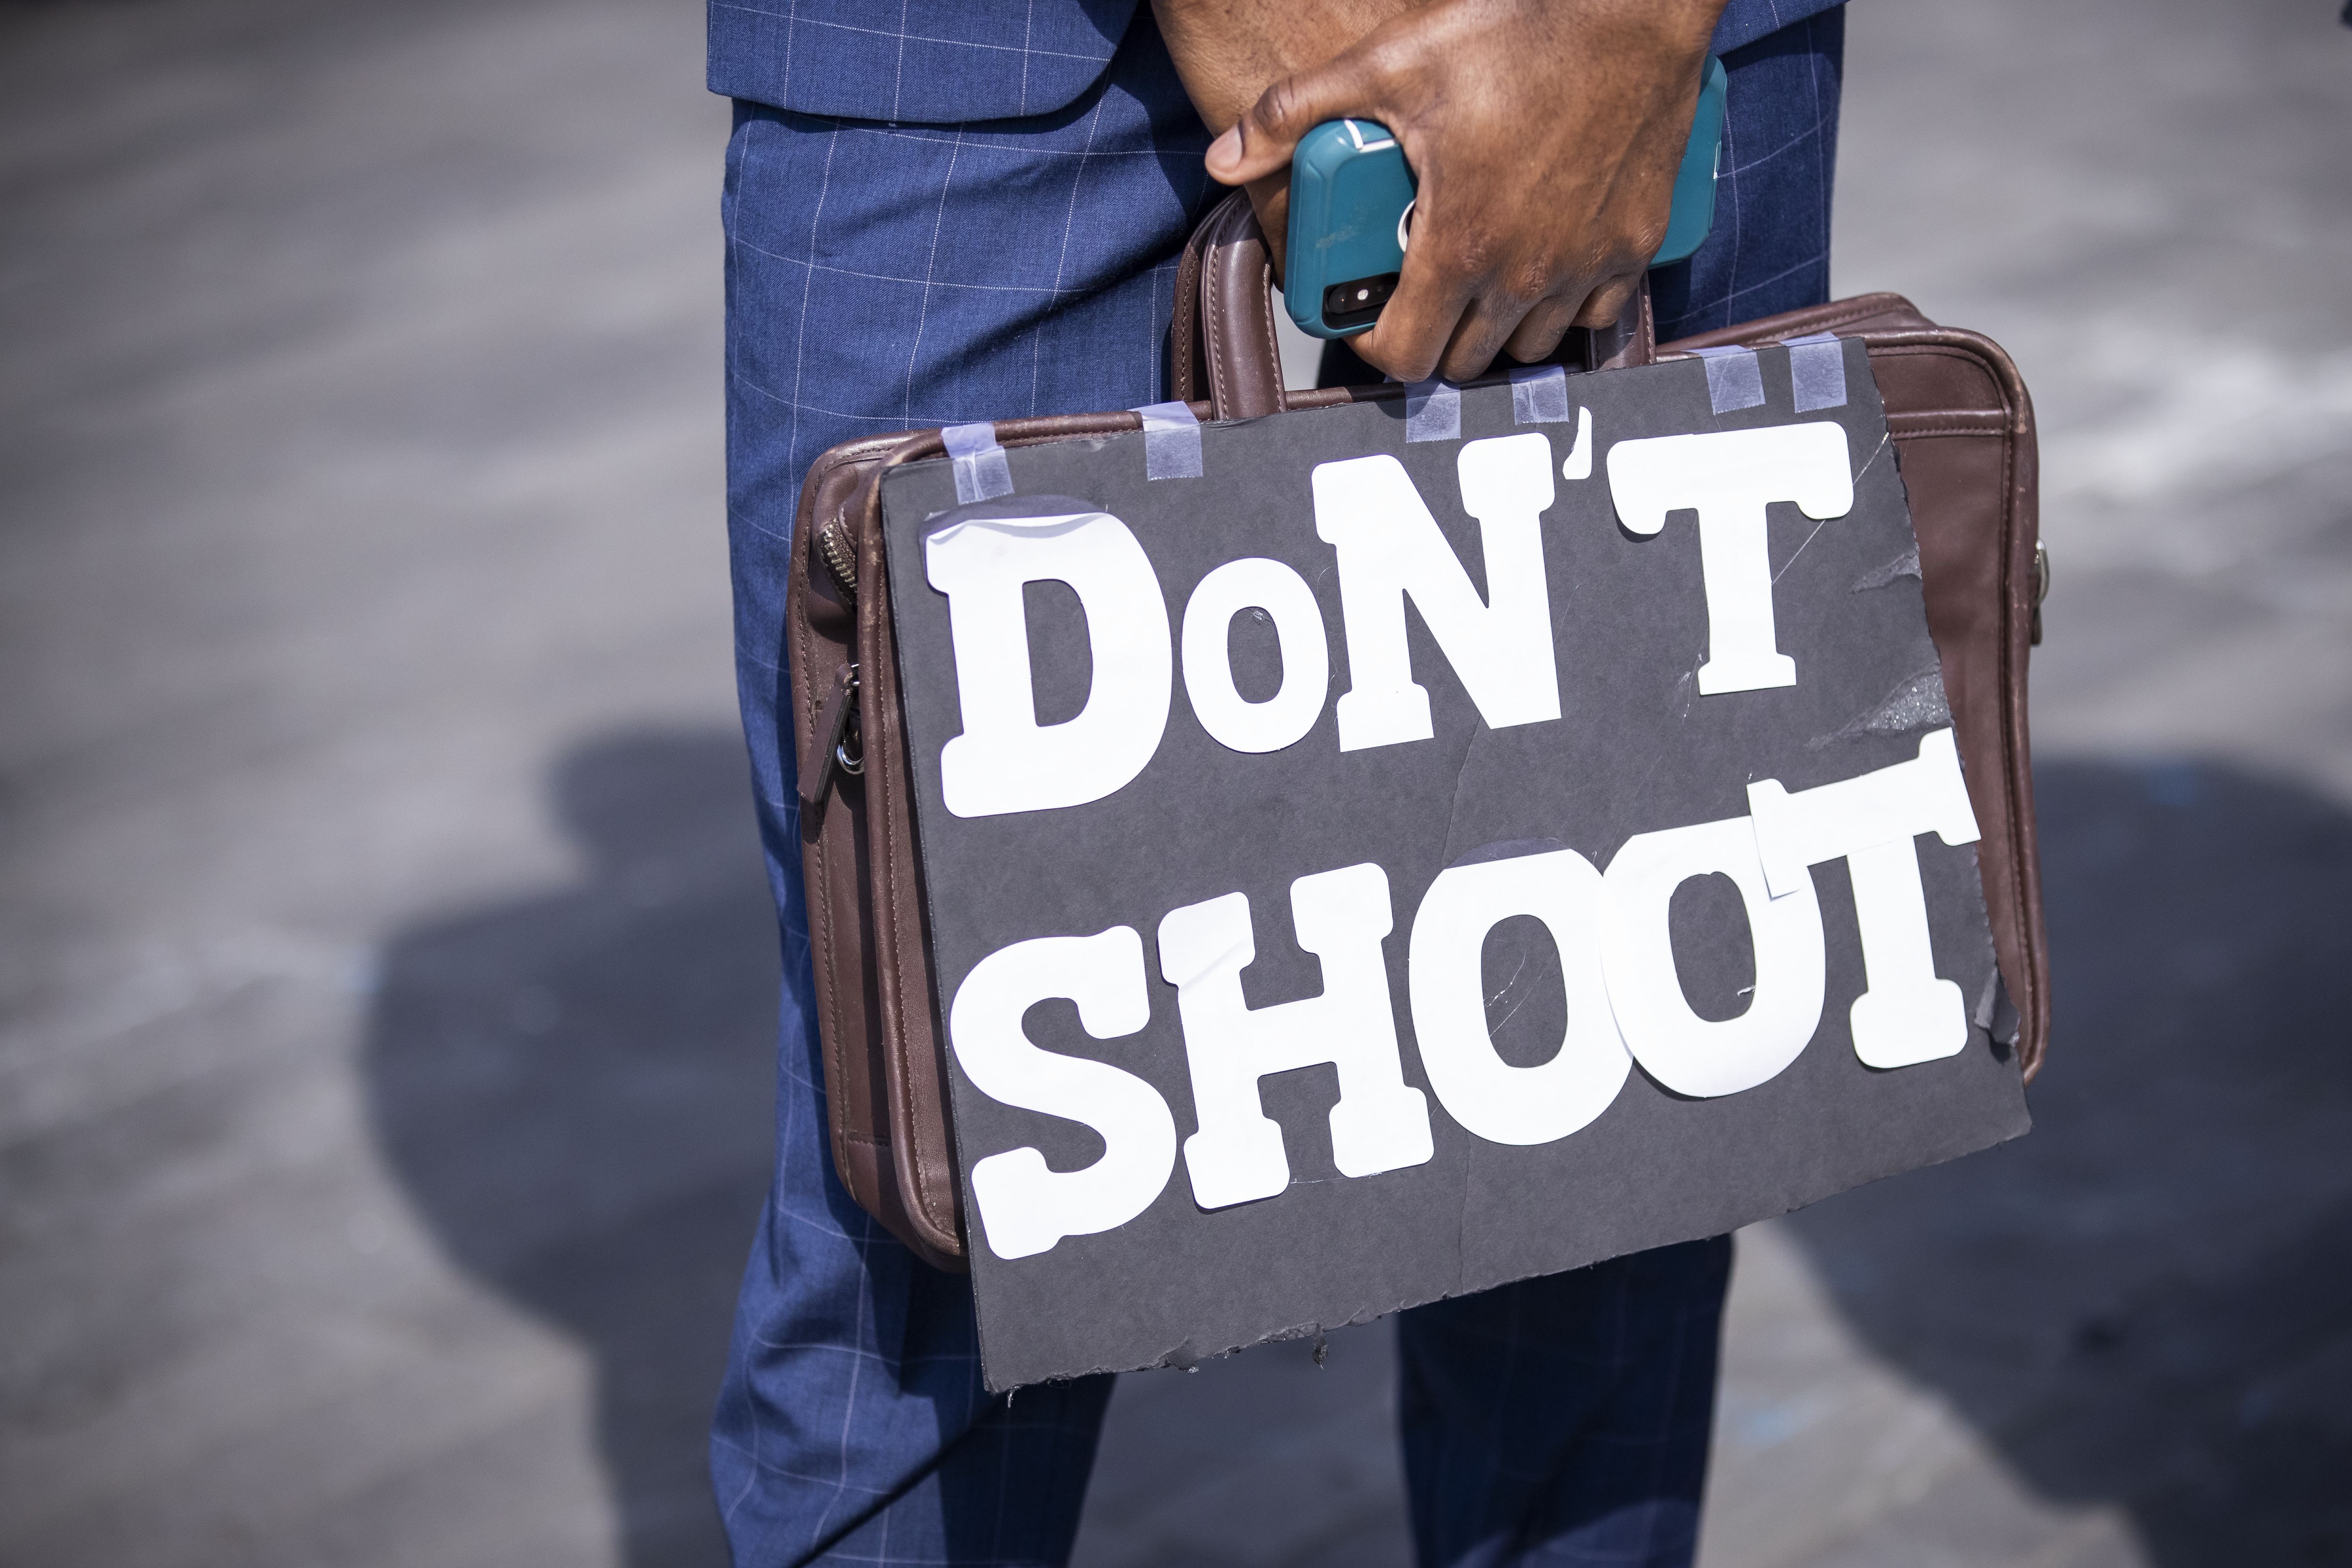 Illustration of a protester holding a suitcase that says "Don't shoot"